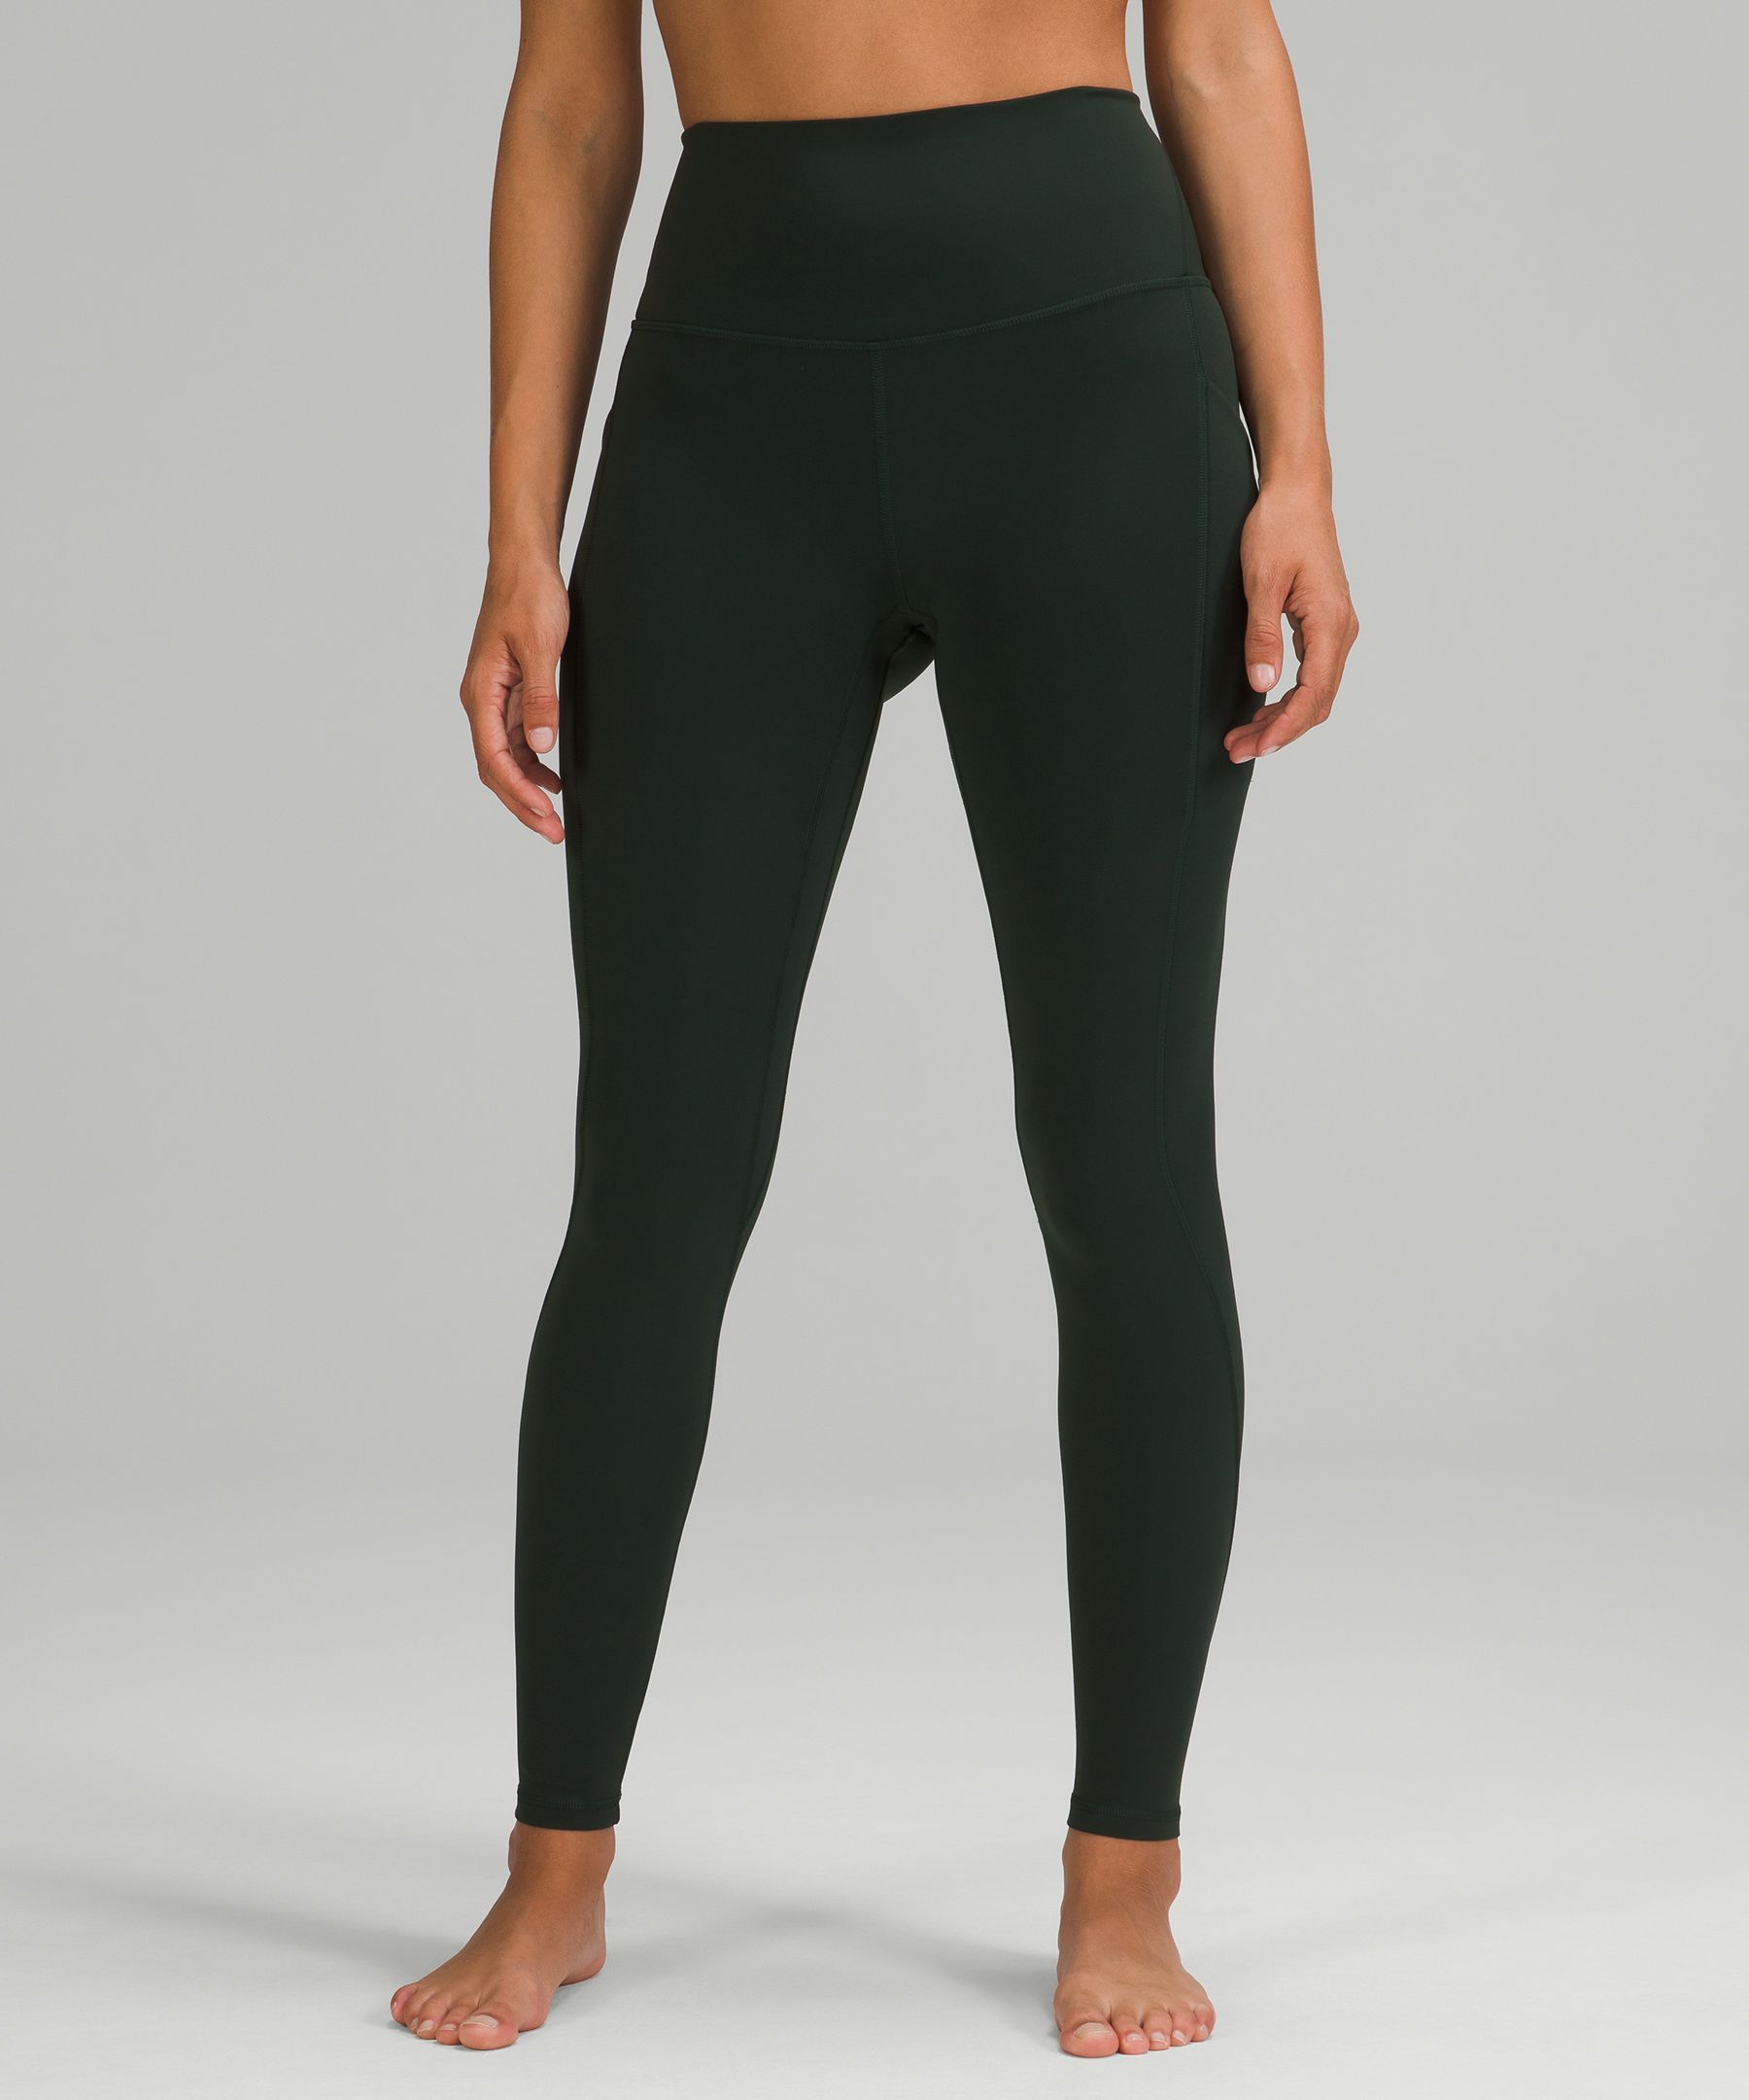 Lululemon Align™ High-rise Pants With Pockets 28" In Rainforest Green